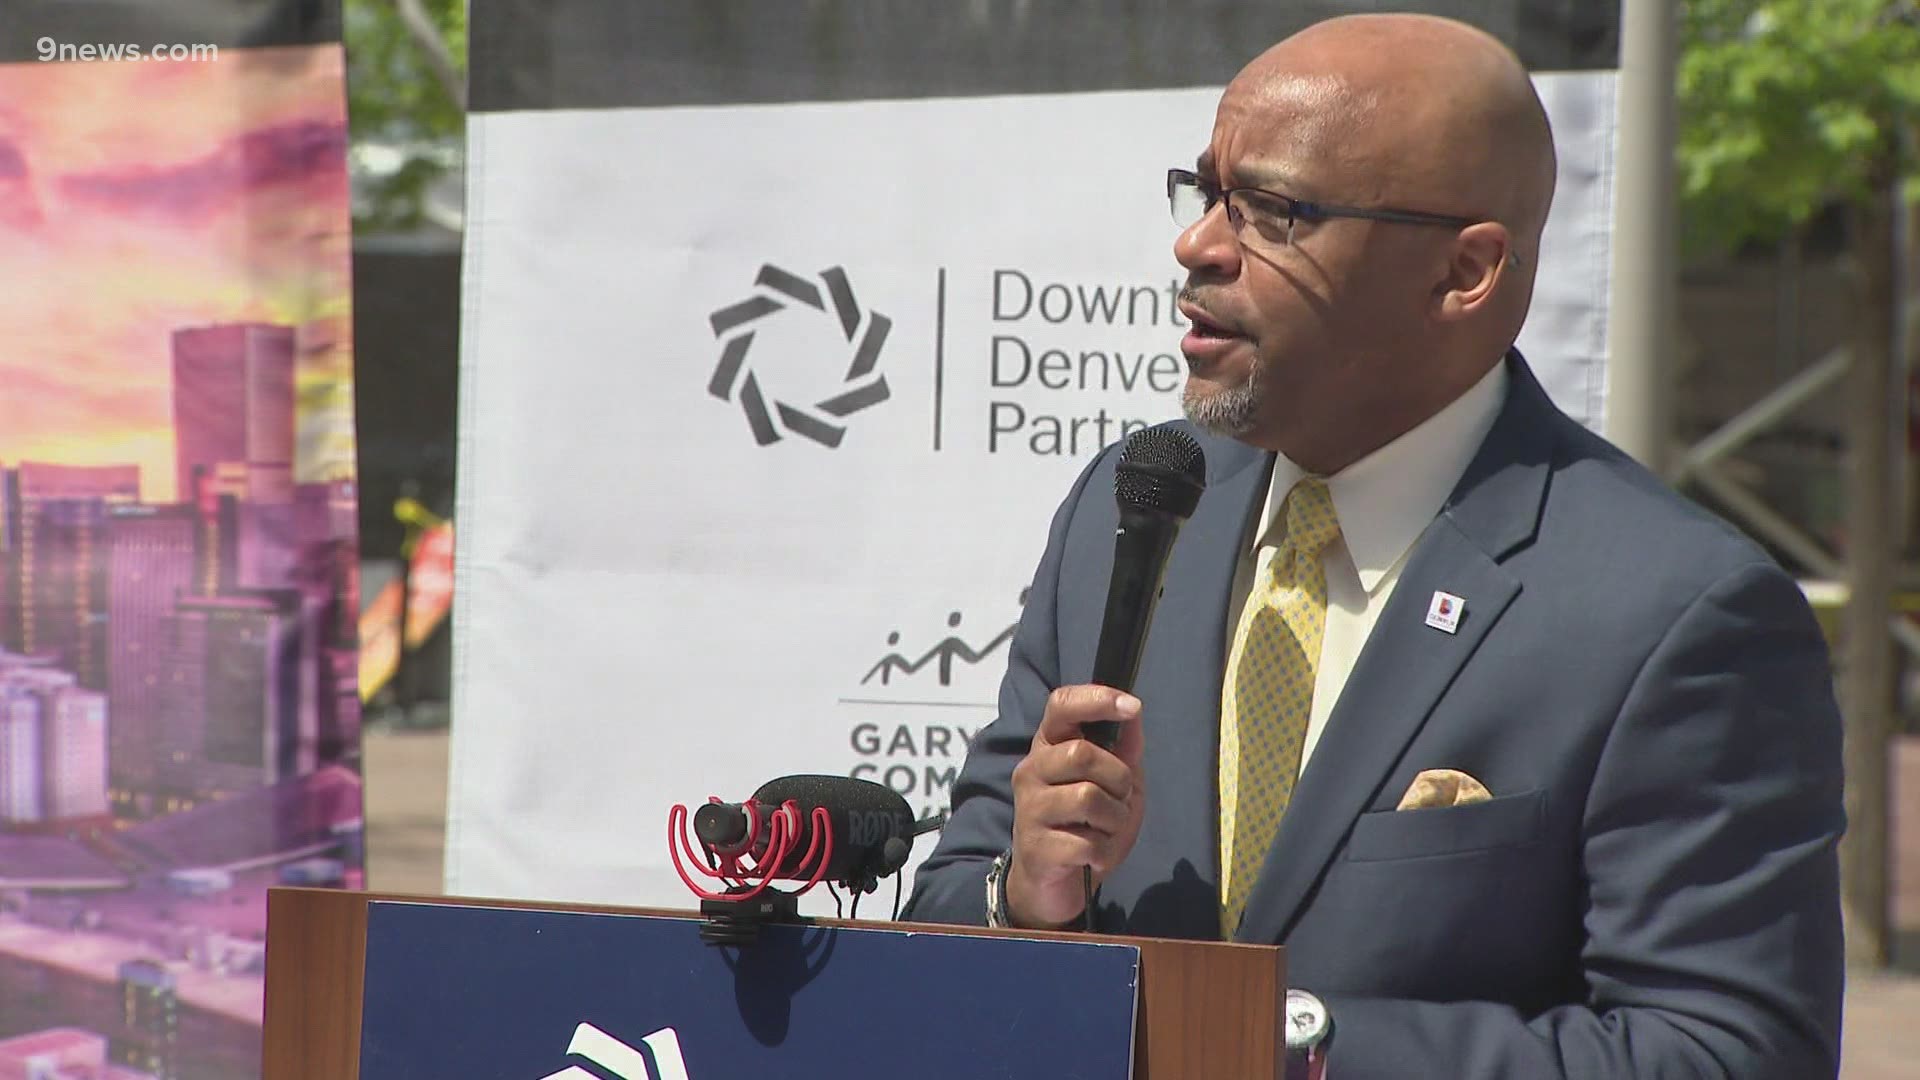 Denver Mayor Michael Hancock made this announcement during a news conference touting his efforts to bring more people downtown.